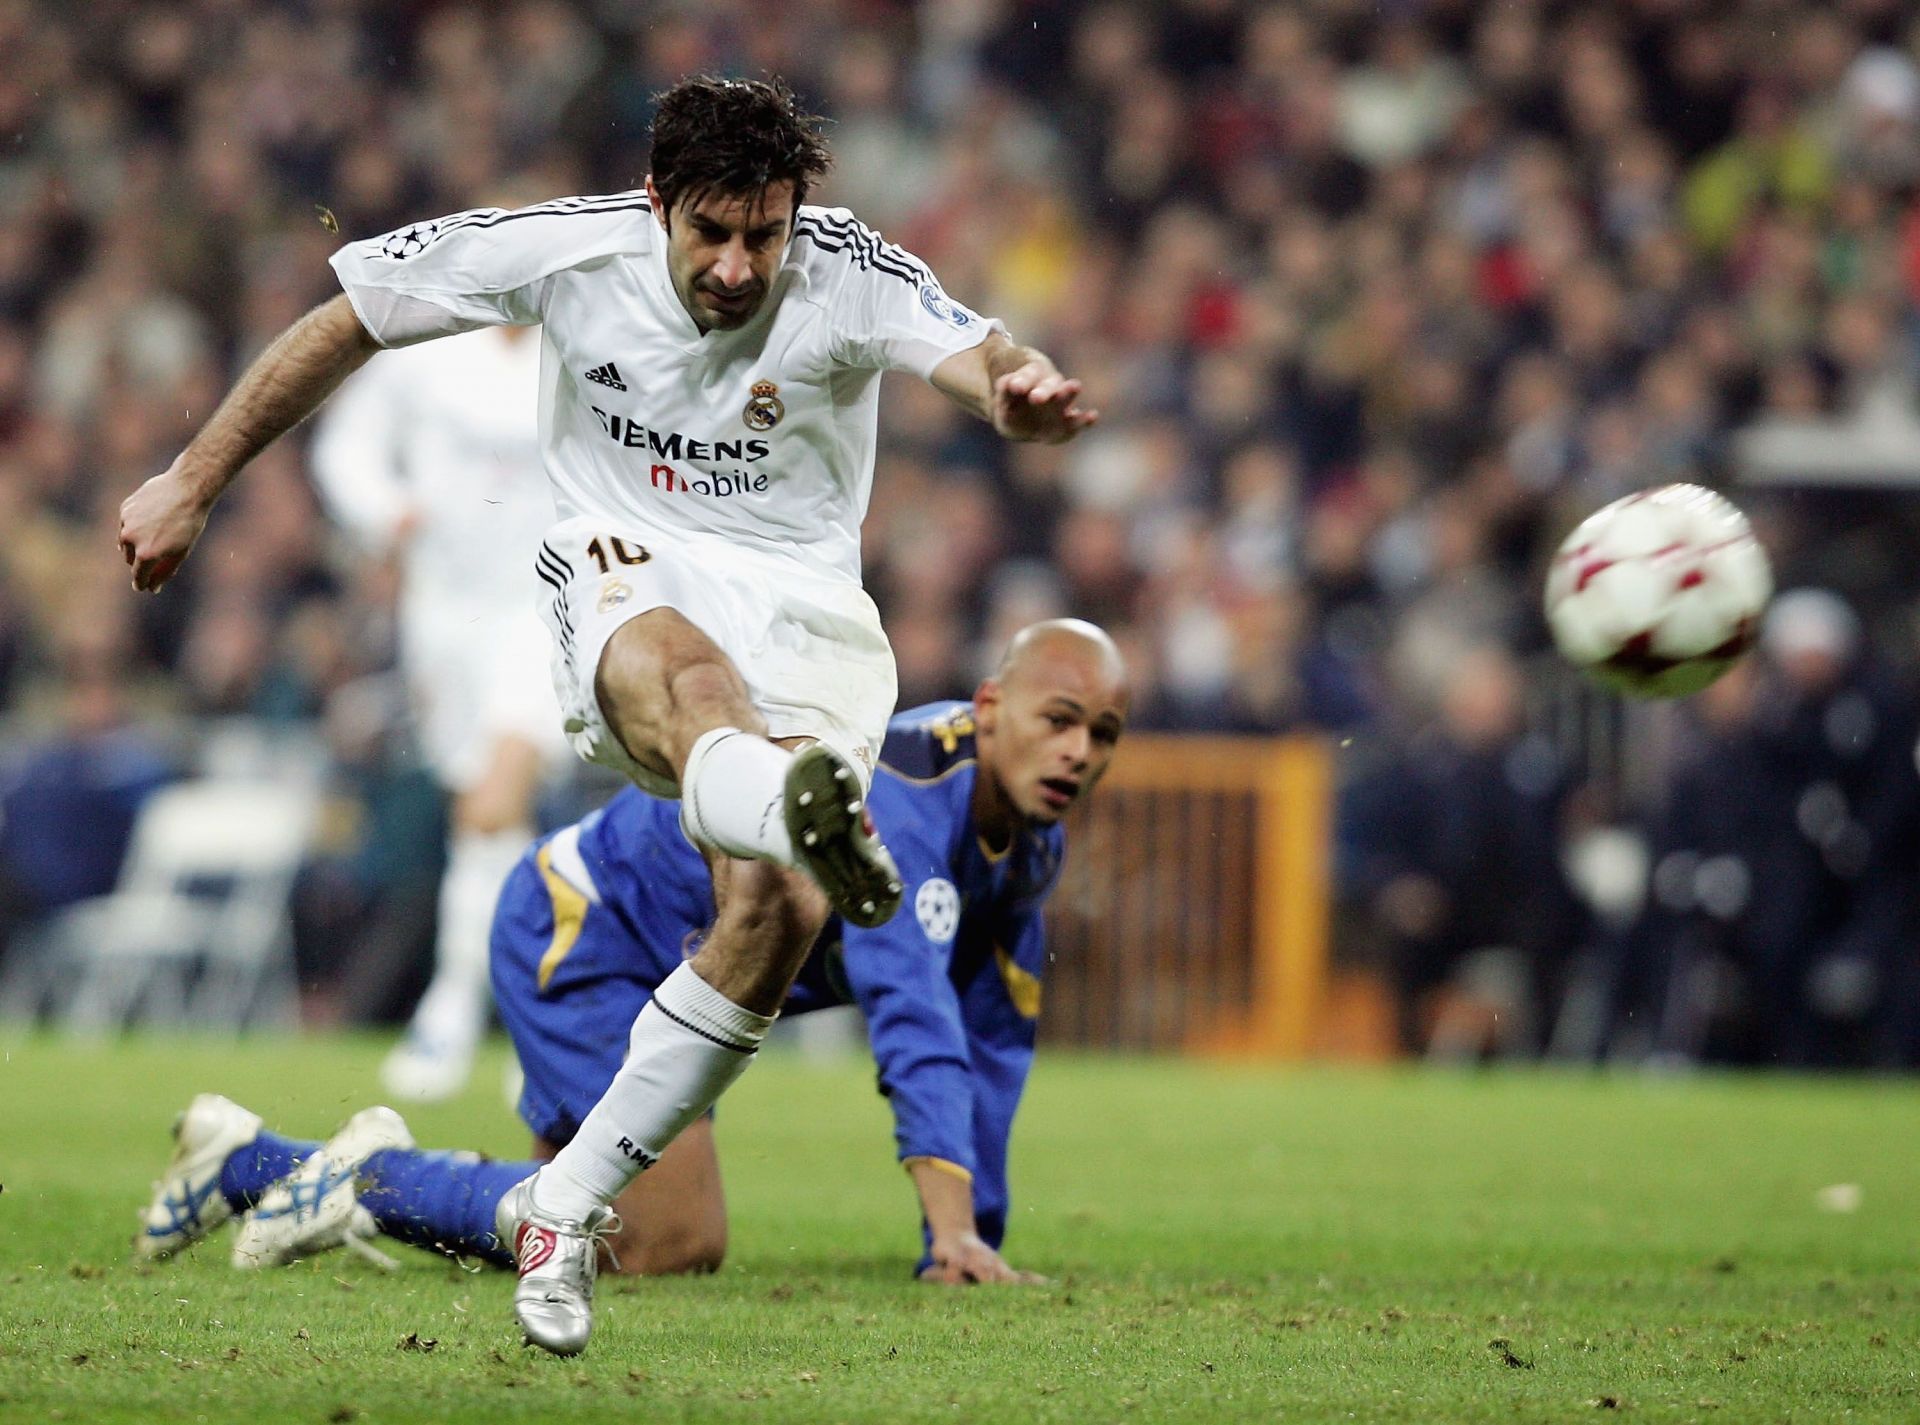 Luis Figo in action for Real Madrid v Juventus